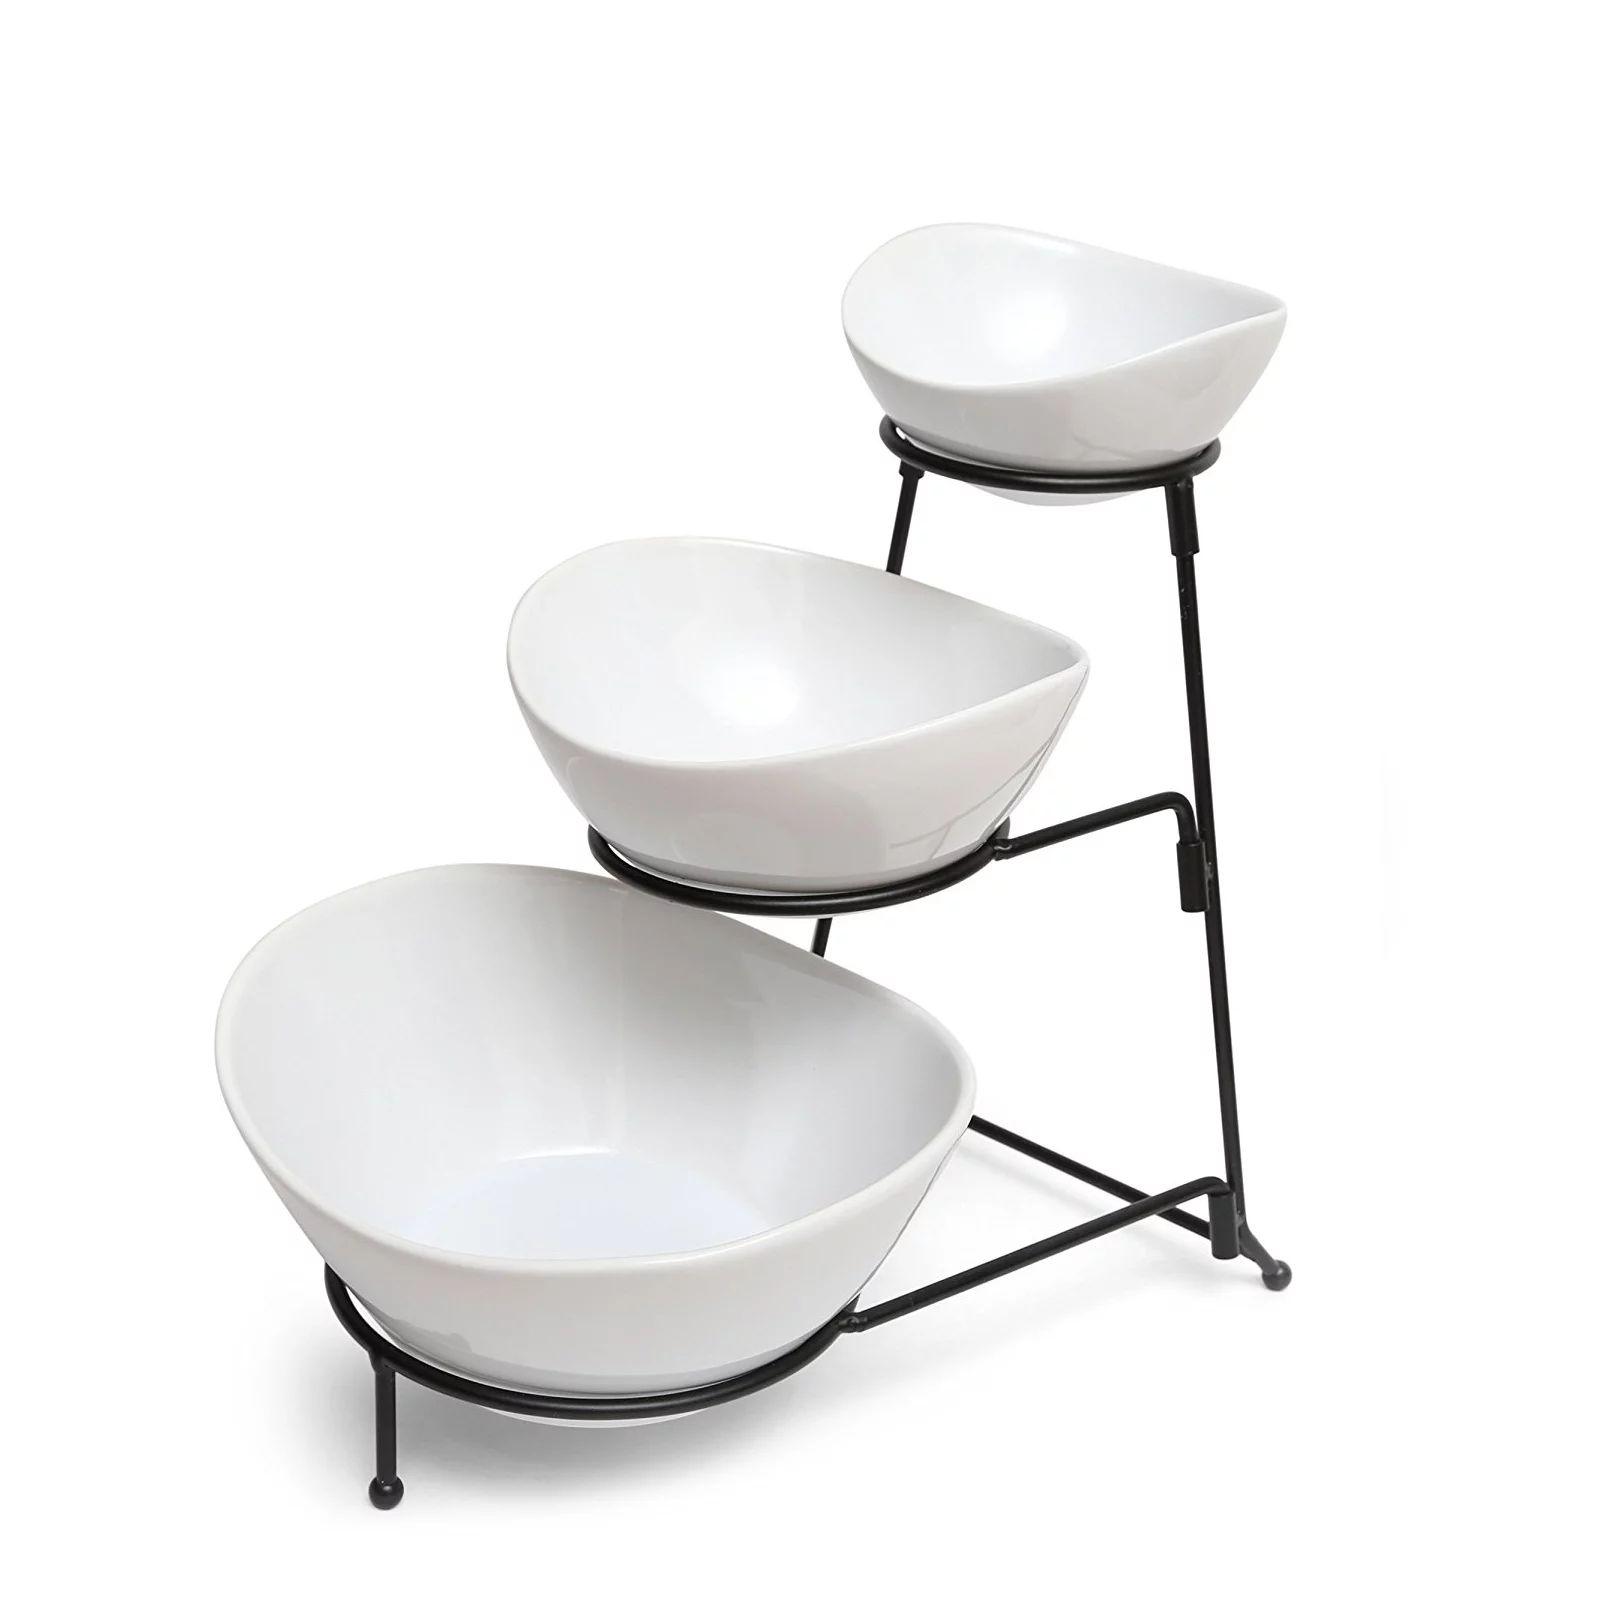 Gibson Elite Gracious Dining 3 Tier Bowl Server Set with Metal Stand in White | Walmart (US)